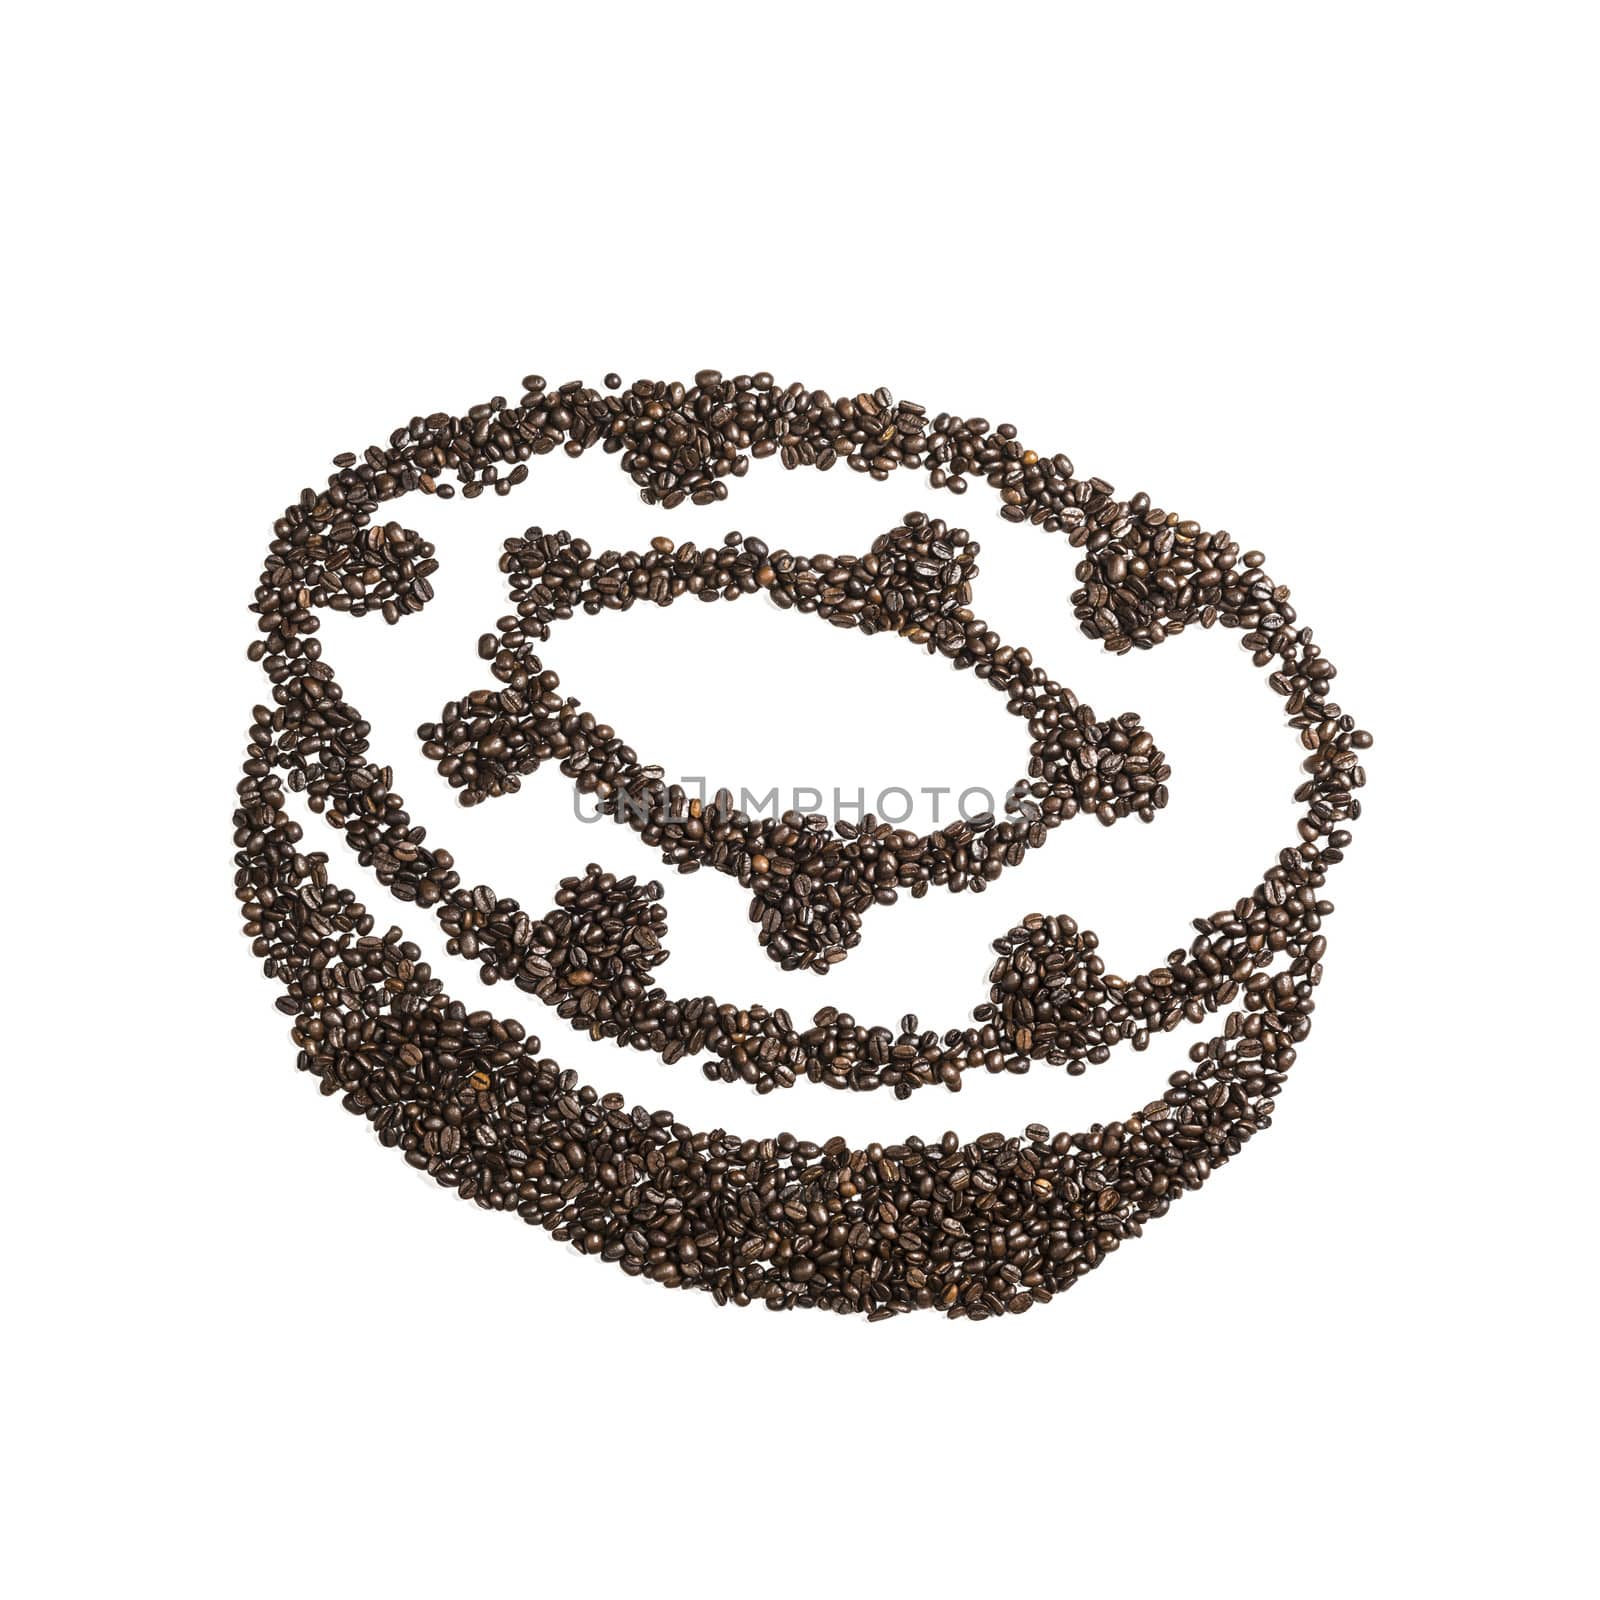 Image of a donut made from coffee beans isolated on white background